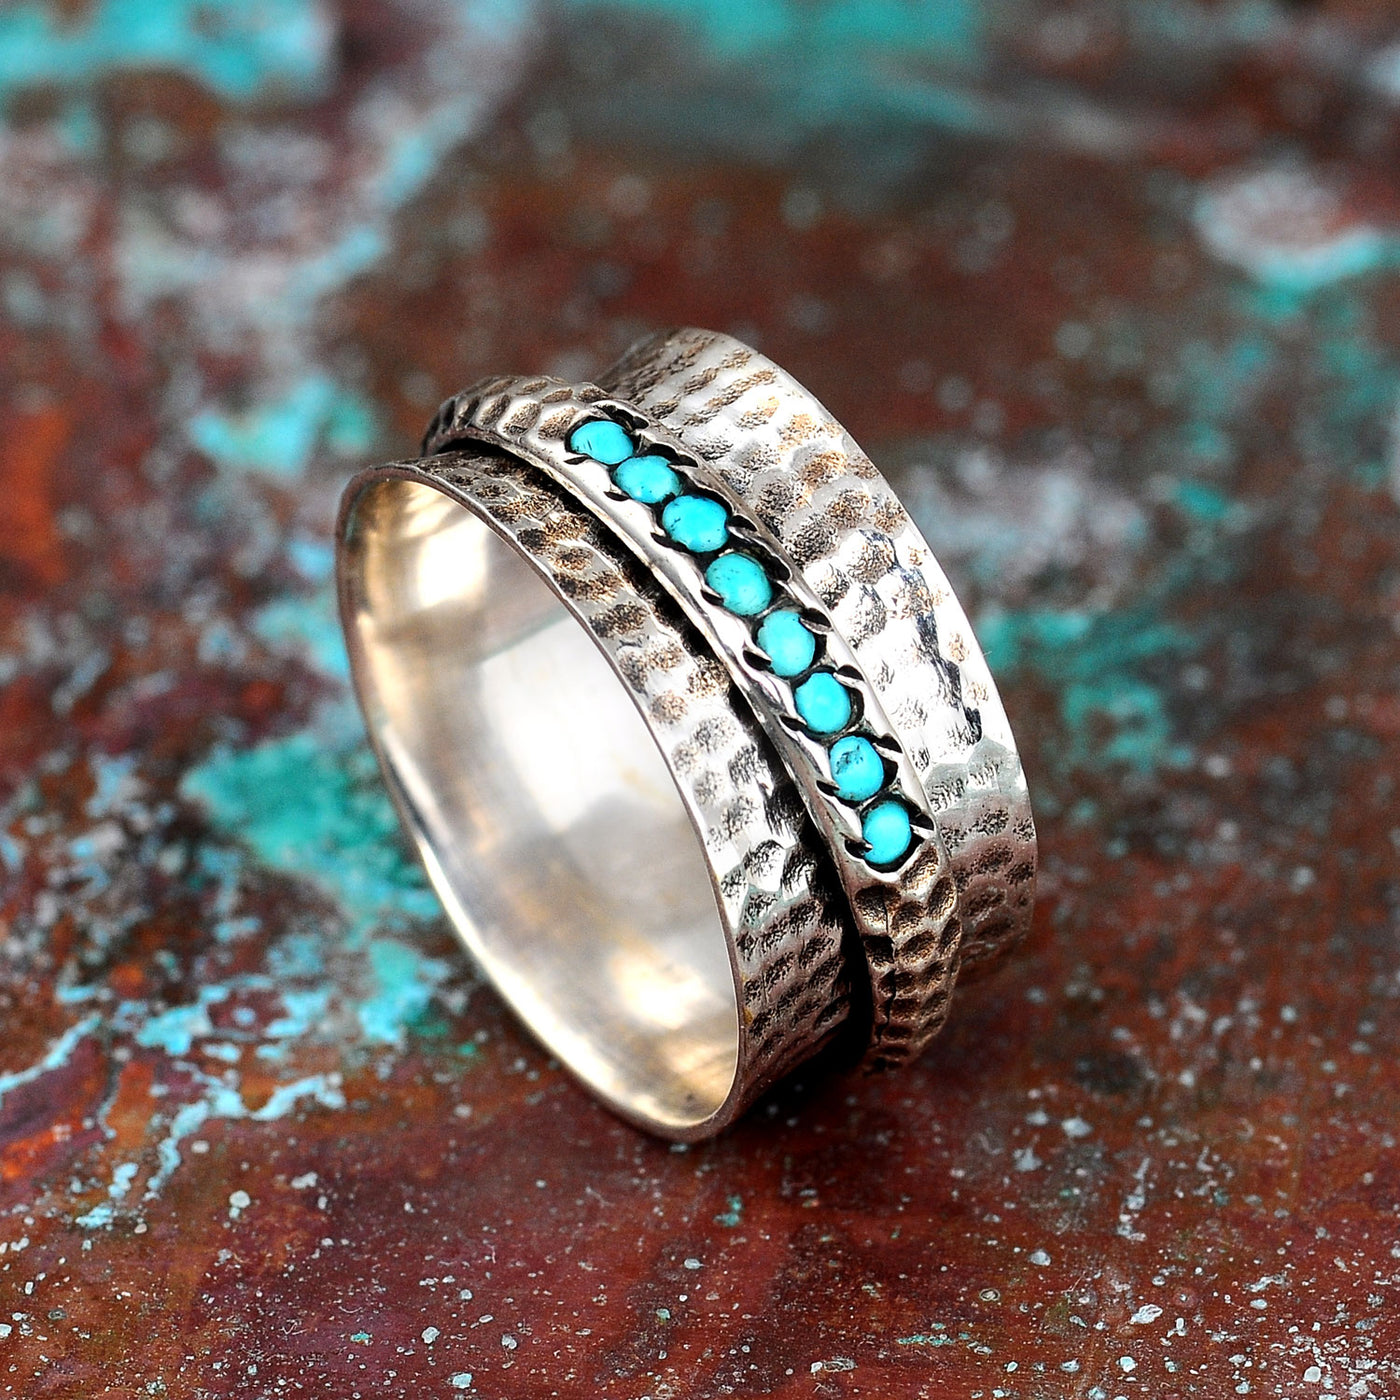 Sterling Silver Spinner Turquoise Ring for Women